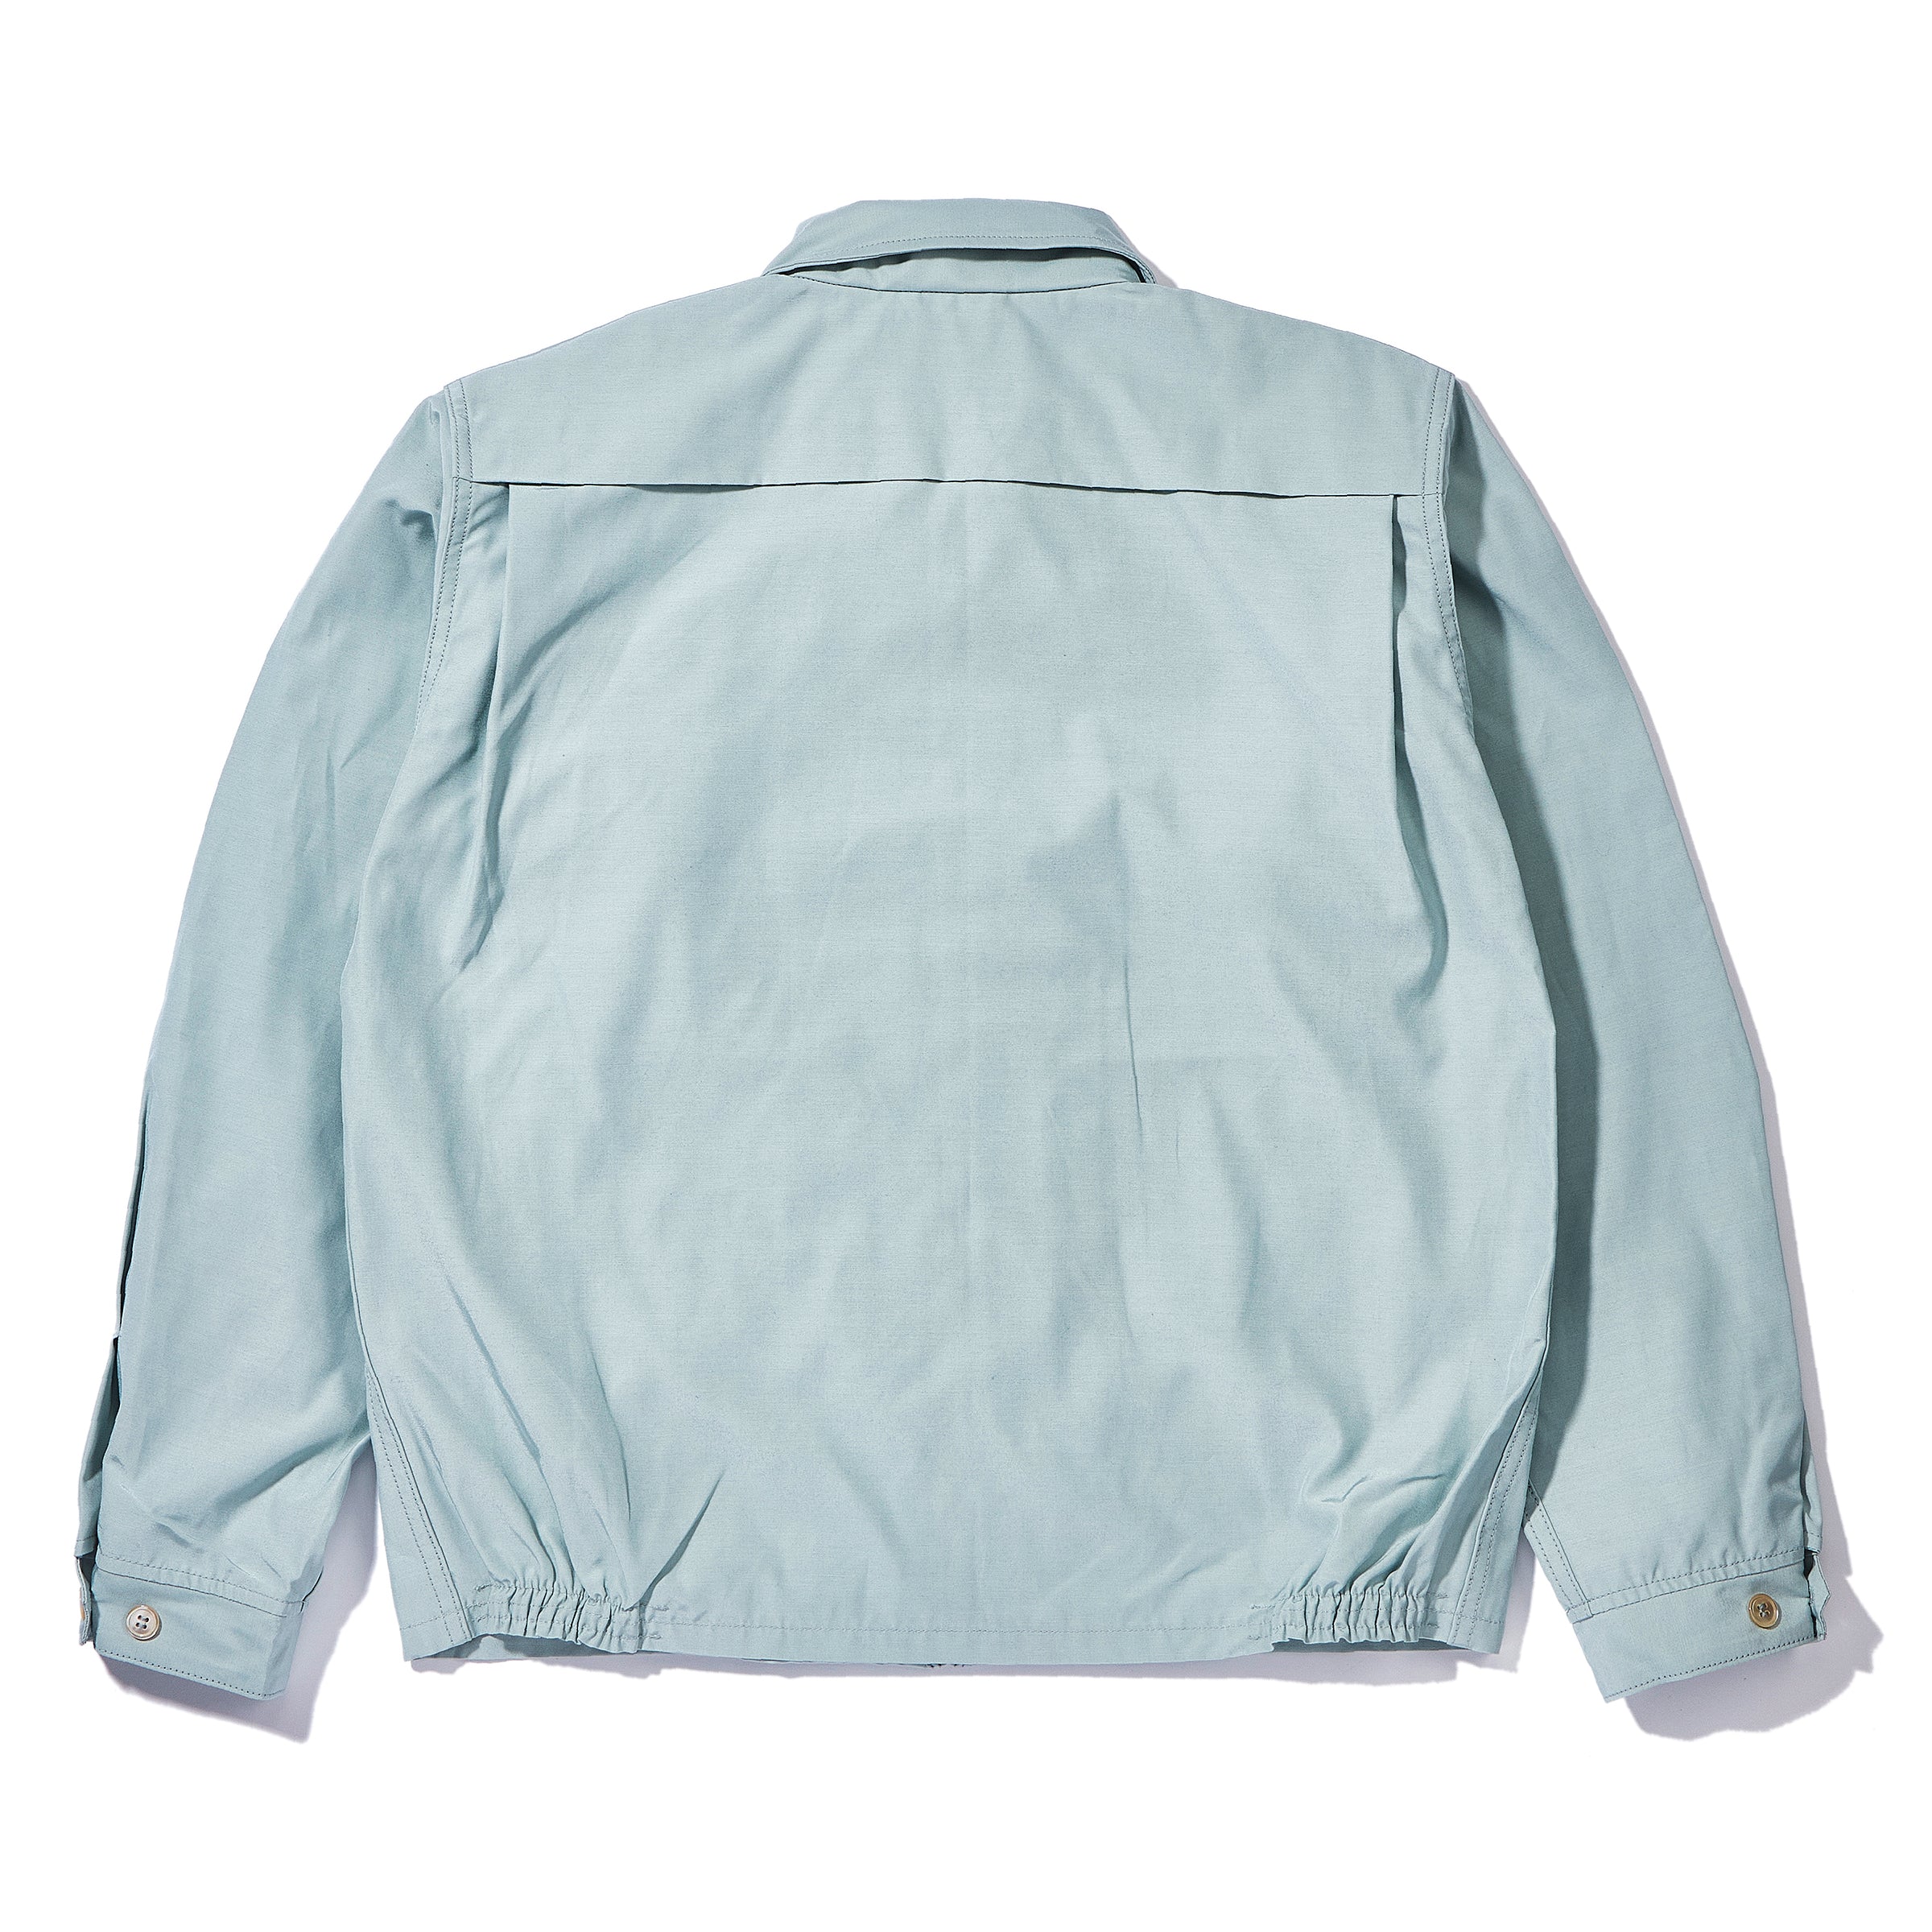 ALL-WEATHER SWING JACKET – The Real McCoy's